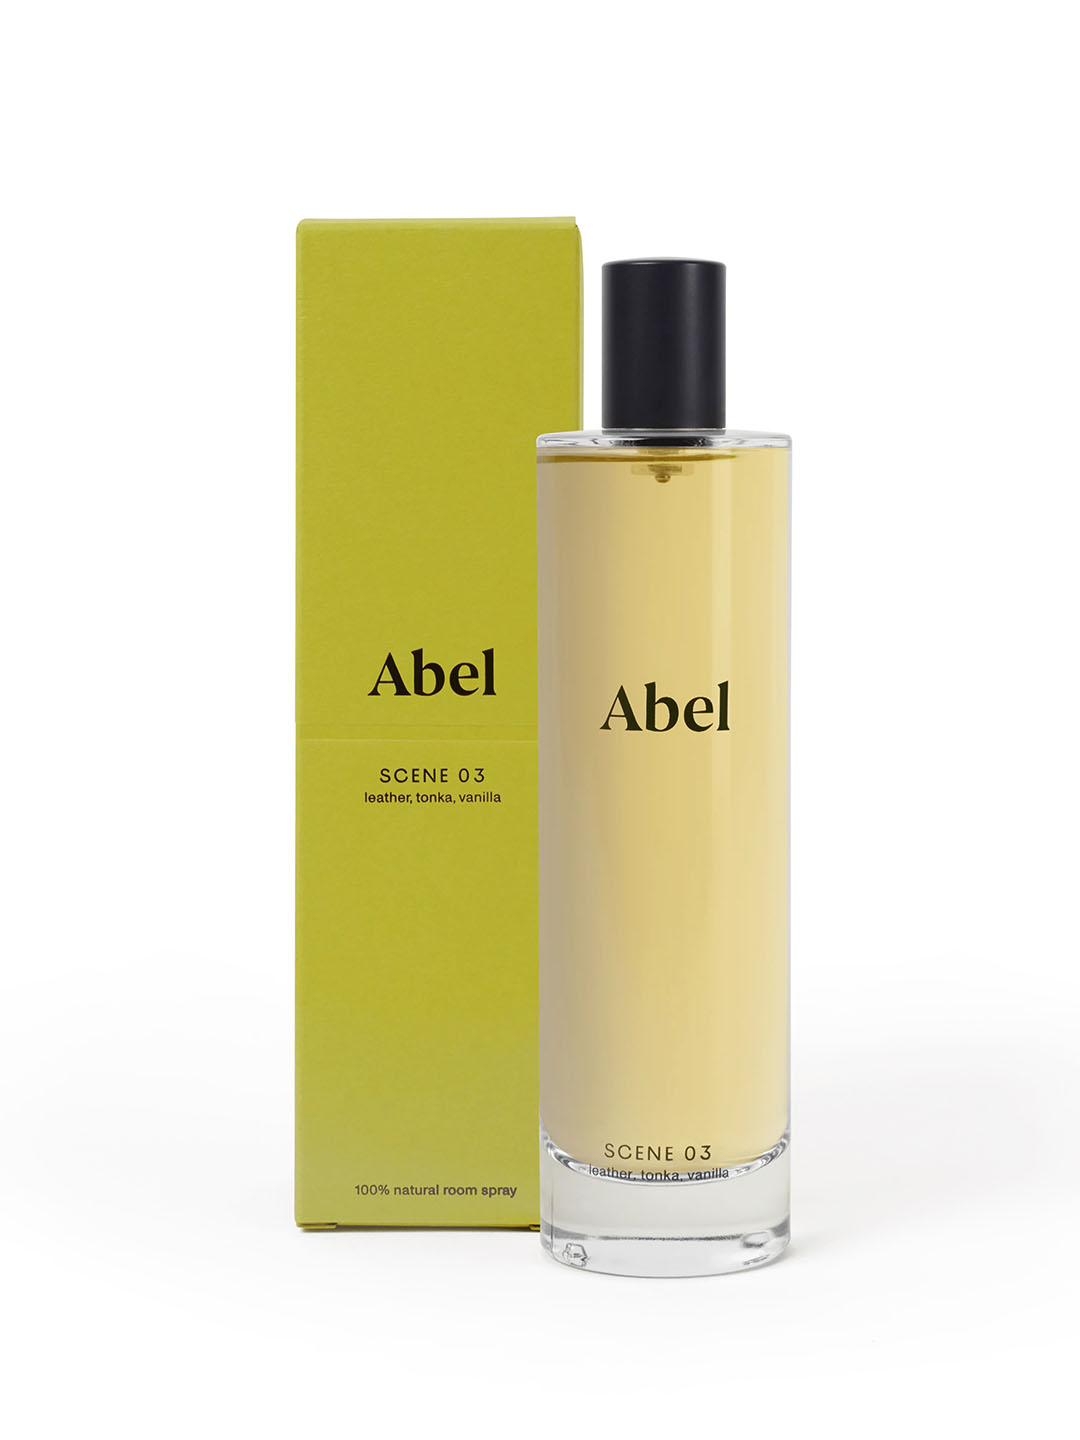 A bottle of Abel Room Spray – Scene 03 with its packaging box, featuring notes of leather, tonka, and vanilla, made with natural ingredients.